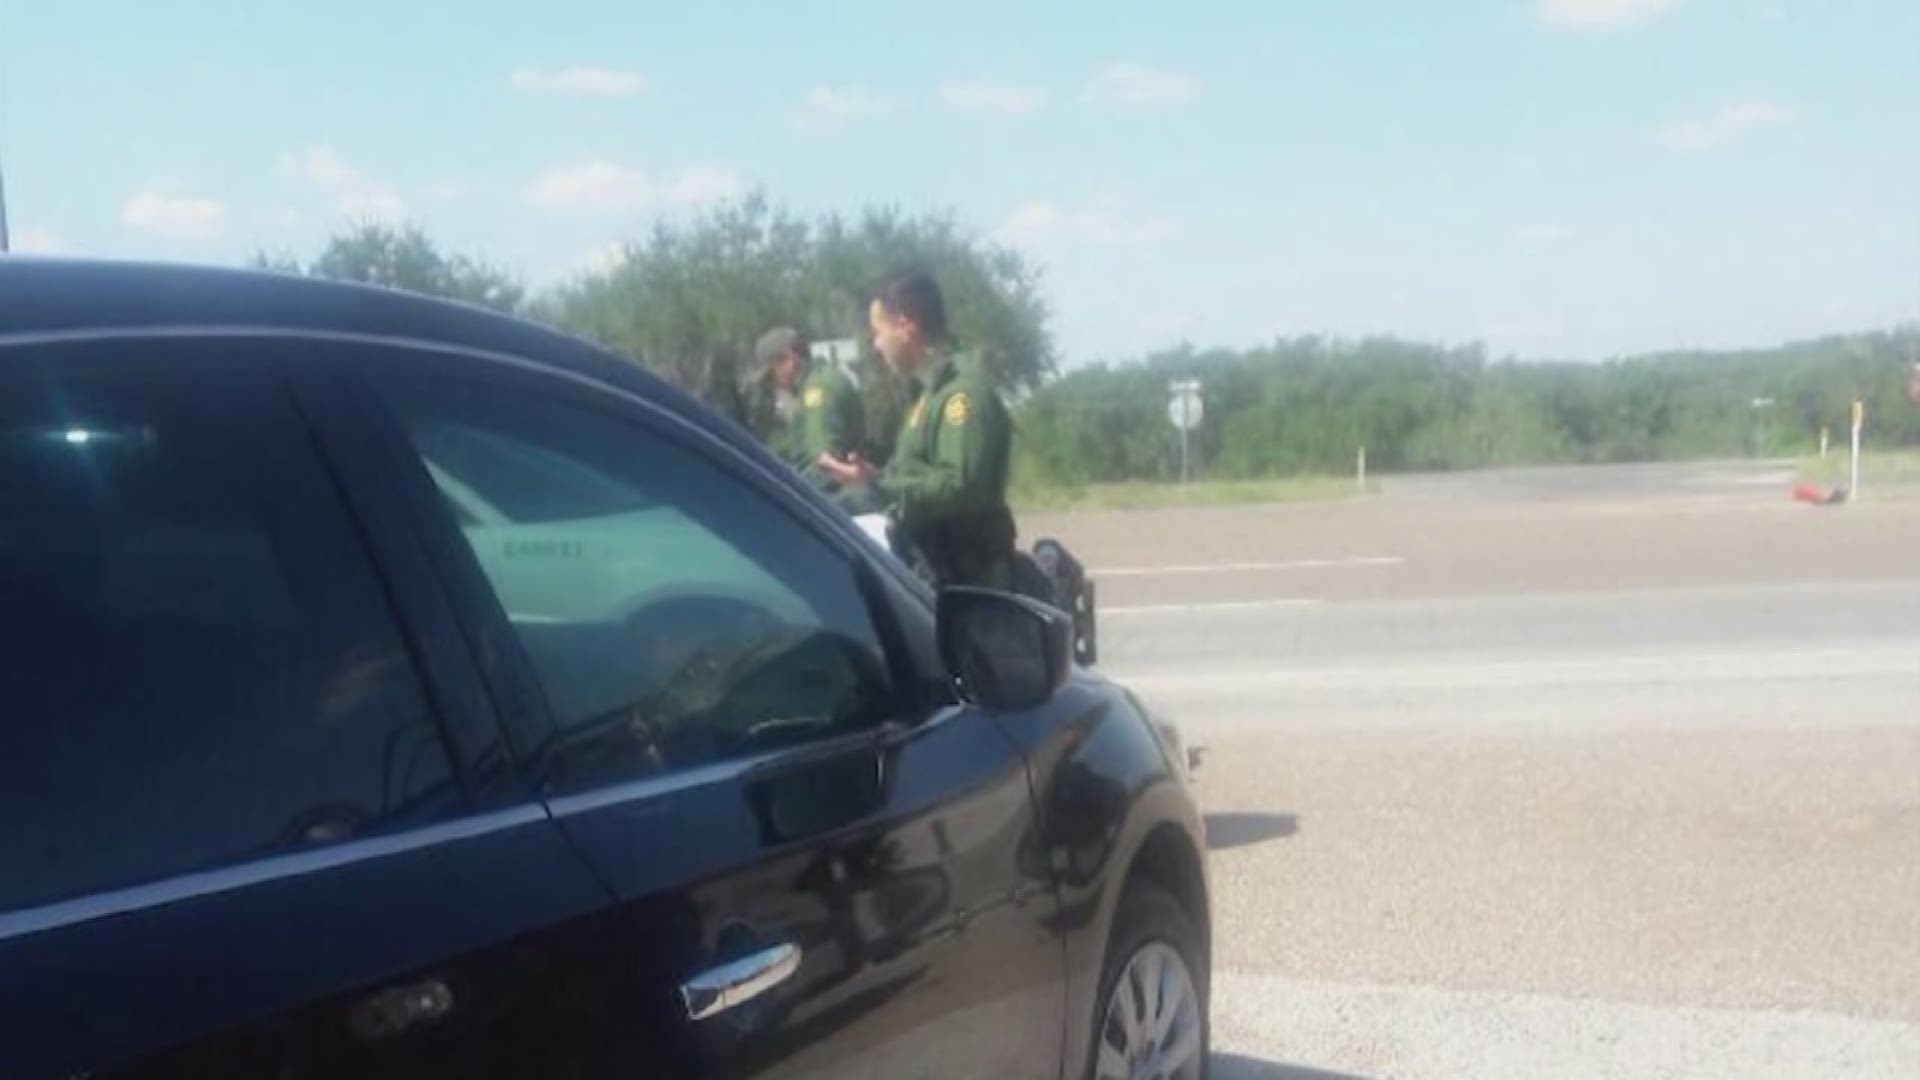 A DACA recipient and a U.S. citizen were held at a checkpoint in South Texas and threatened with criminal charges by Border Patrol for trying to travel to San Antonio from the Rio Grande Valley.